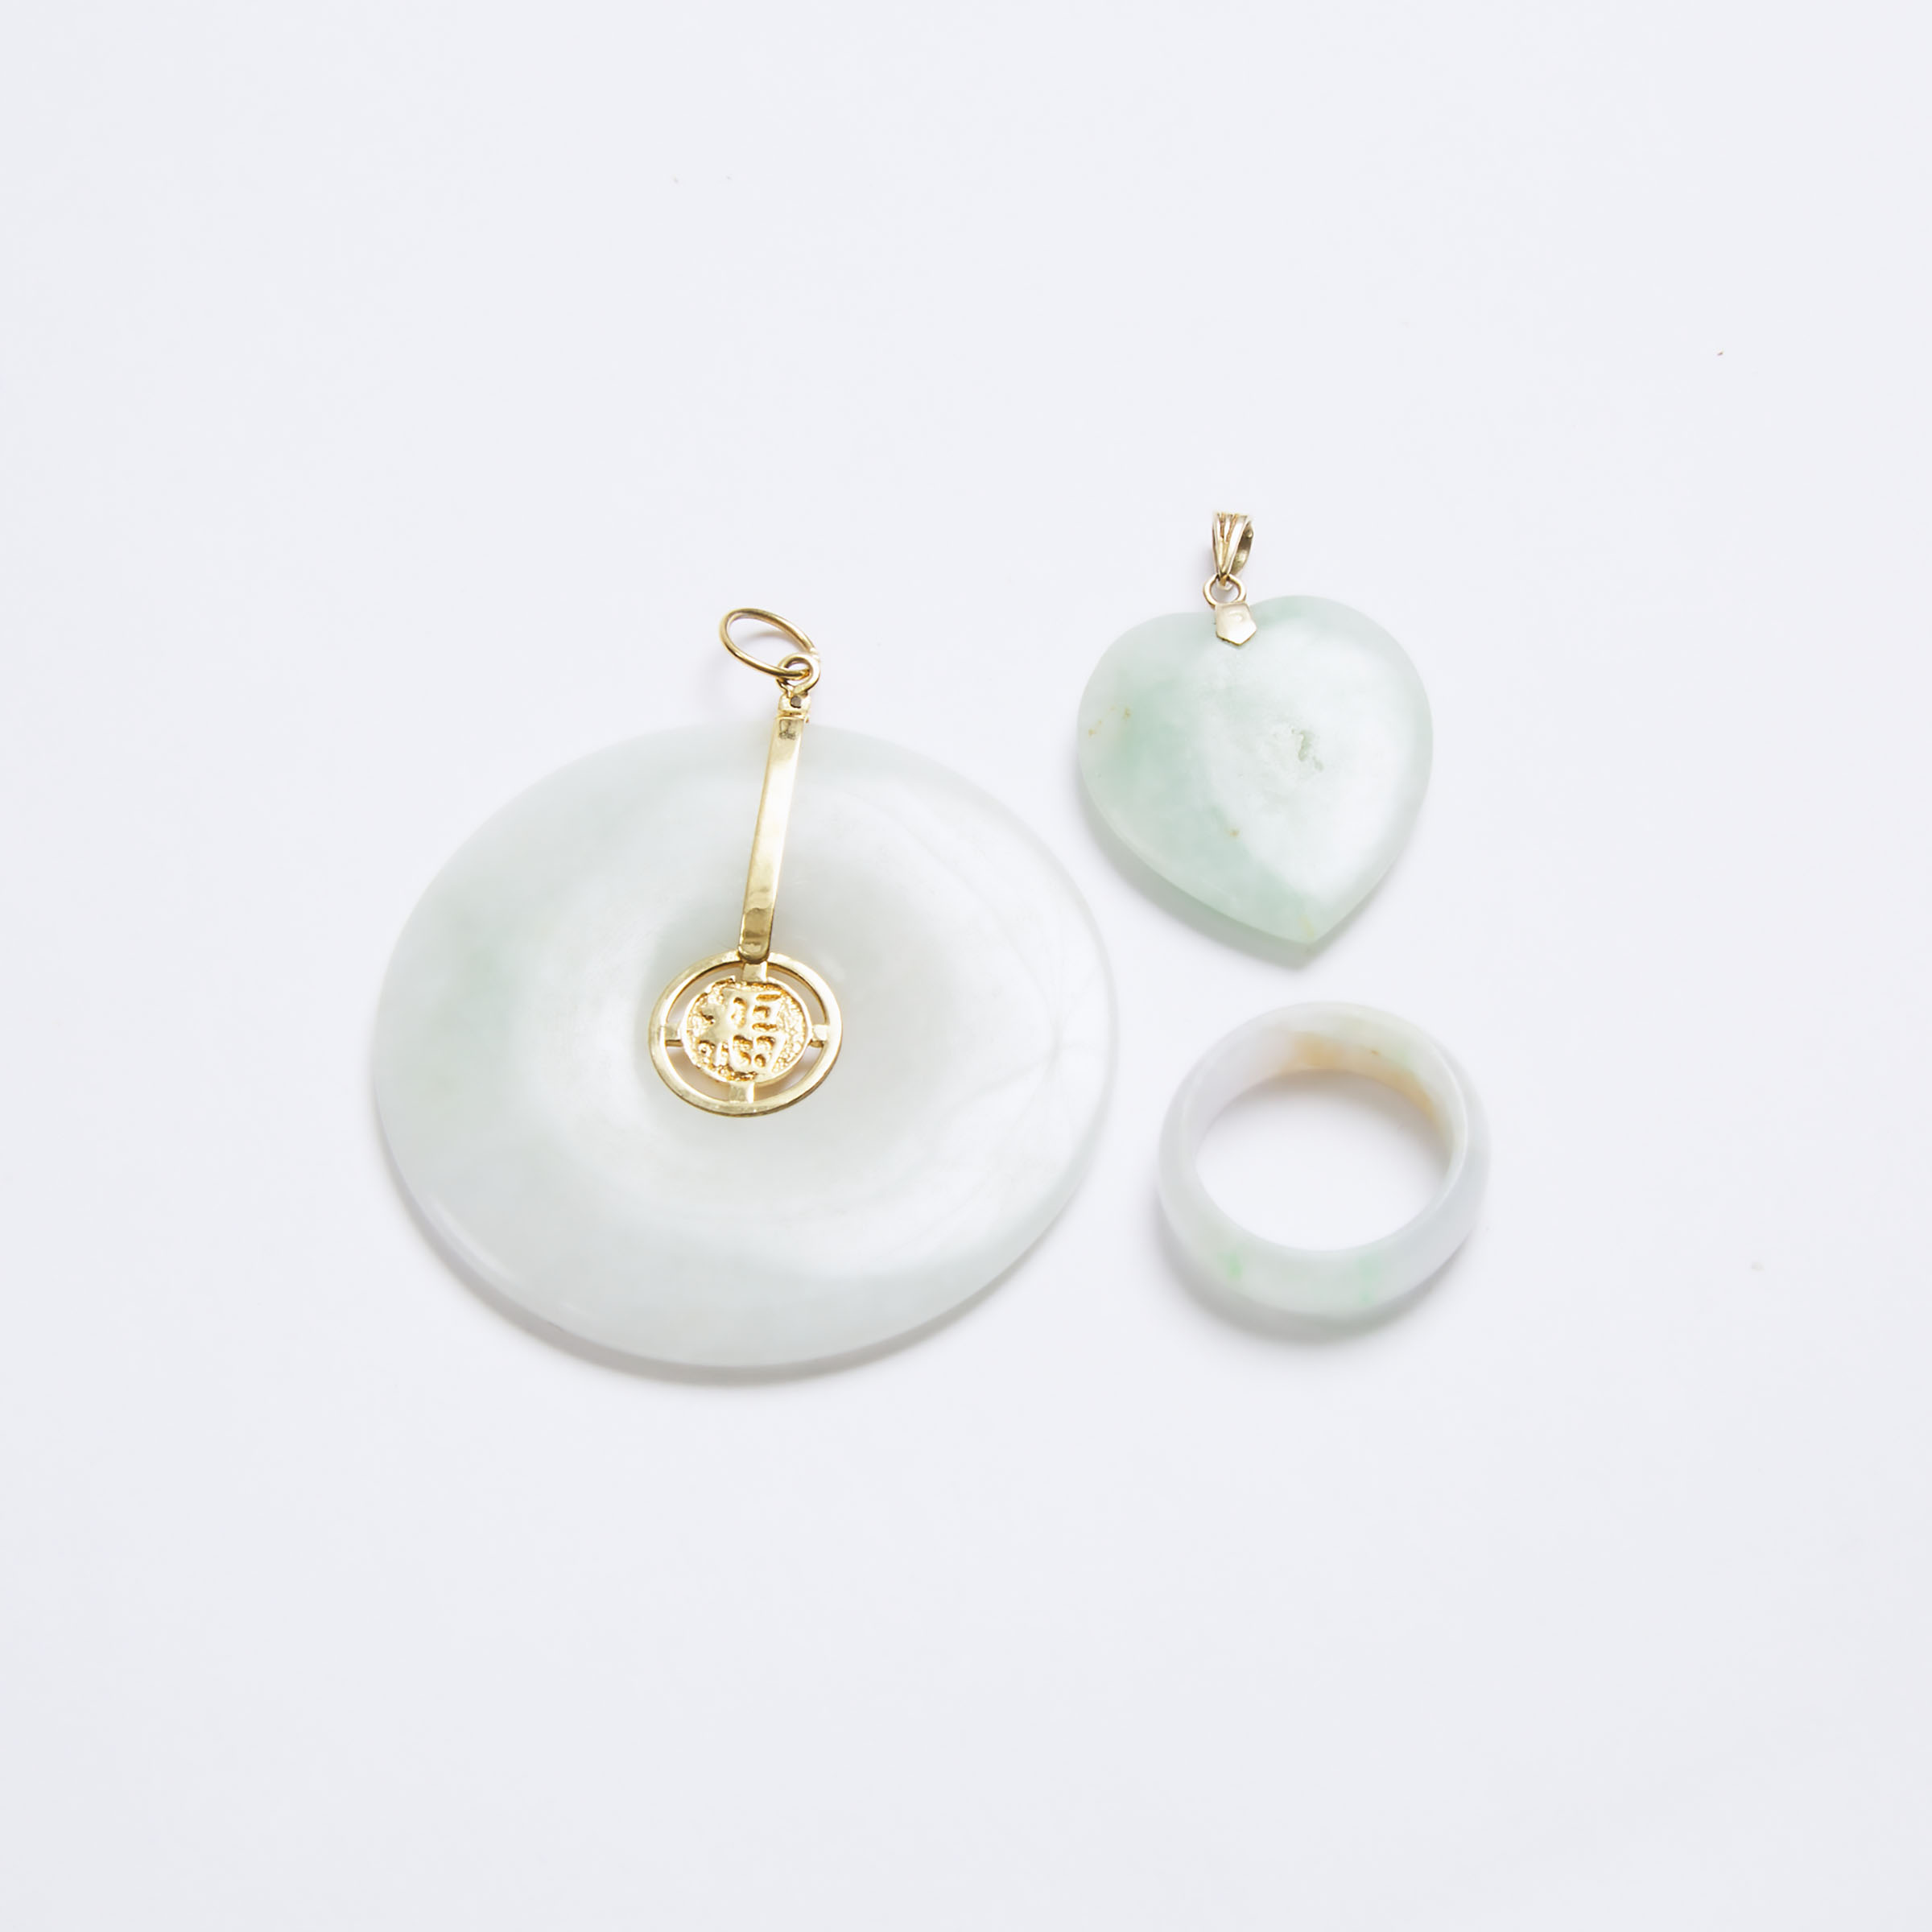 A Group of Three Natural Jadeite Jewellery, Early to Mid 20th Century